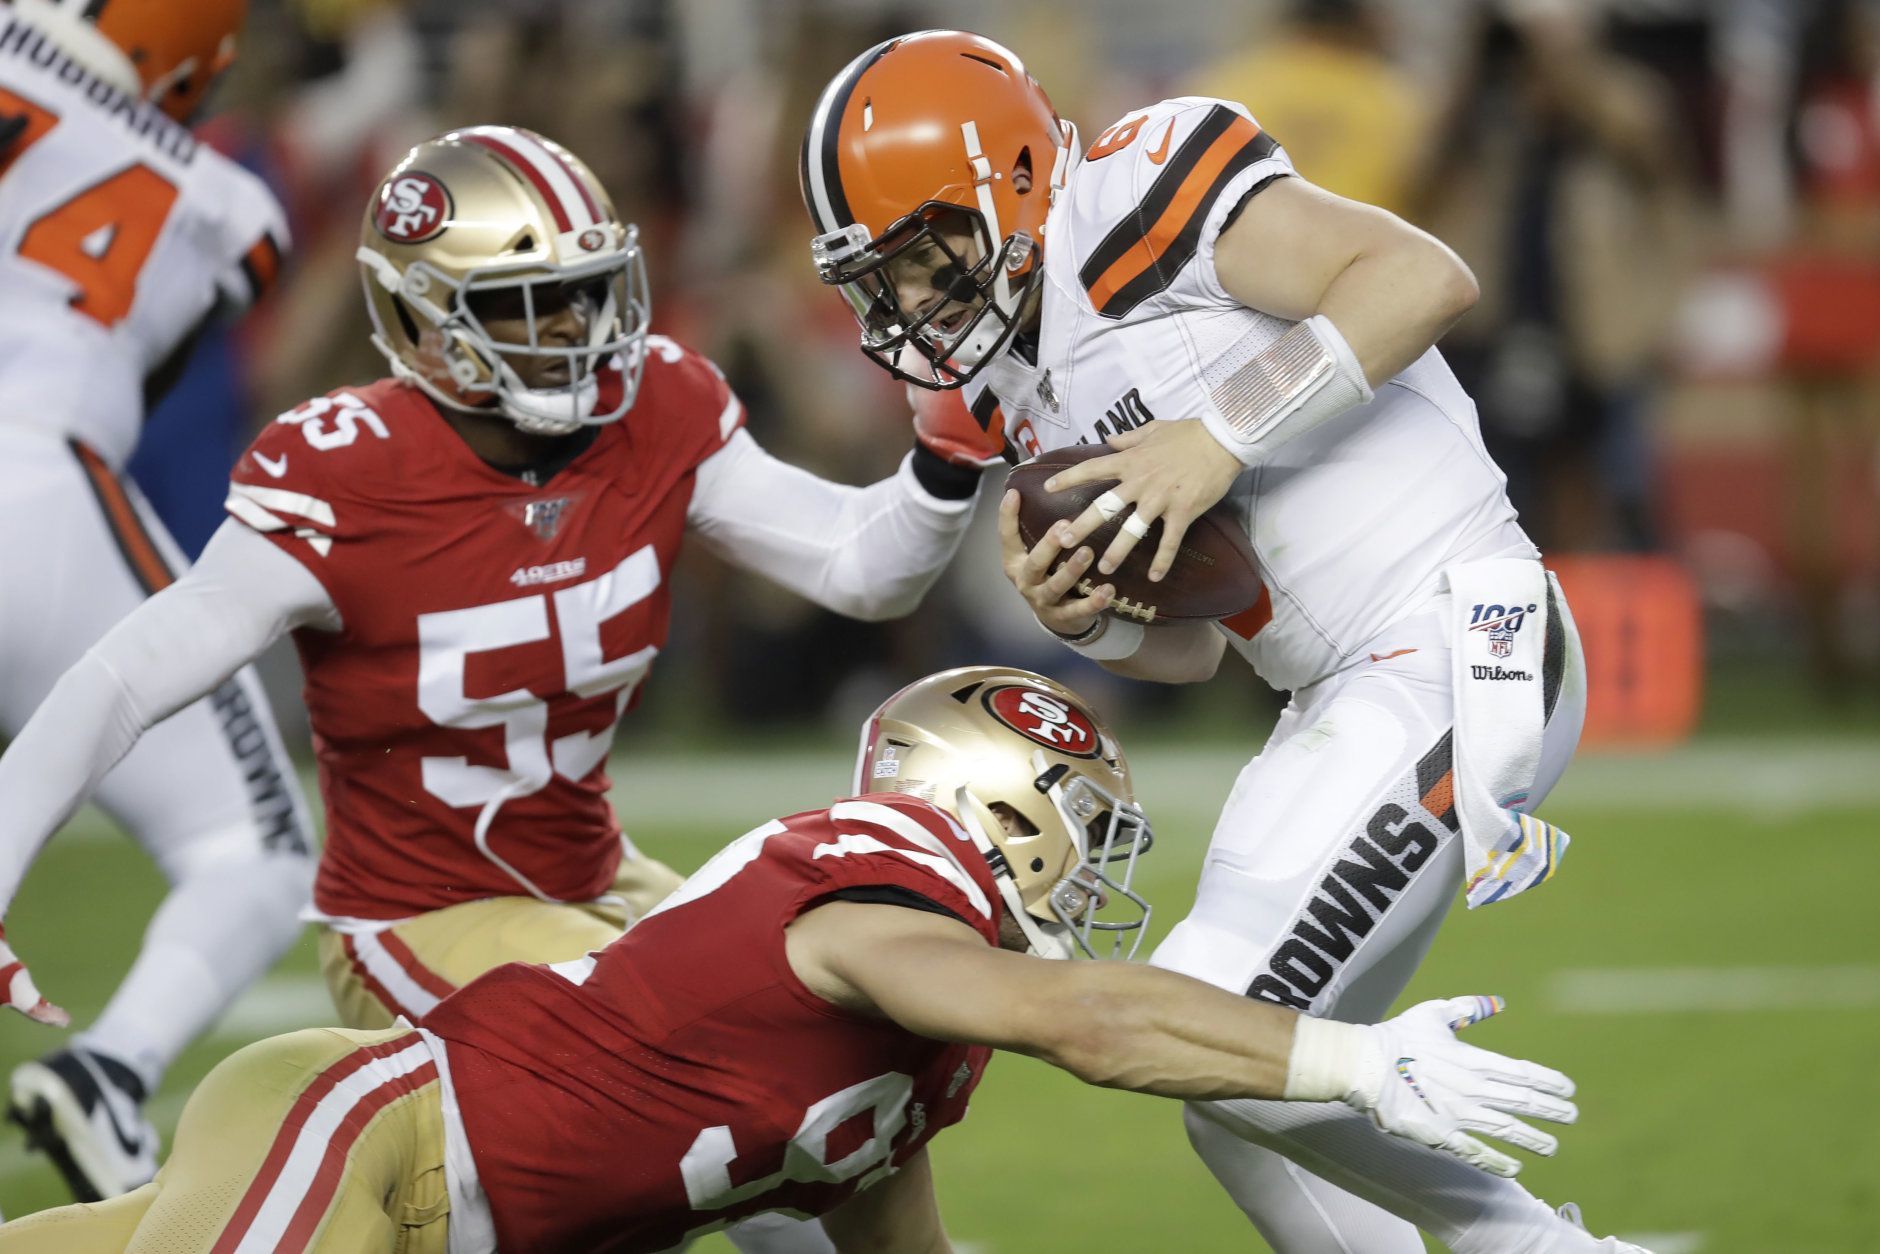 <p><em><strong>Browns 3</strong></em><br />
<em><strong>49ers 31</strong></em></p>
<p>San Francisco&#8217;s run for 800 yards in four games. The defense completely shut down Cleveland to not only make a primetime statement that they&#8217;re for real, but the undefeated Niners planted a flag atop the NFC West entering a big showdown with the Rams at the Coliseum.</p>
